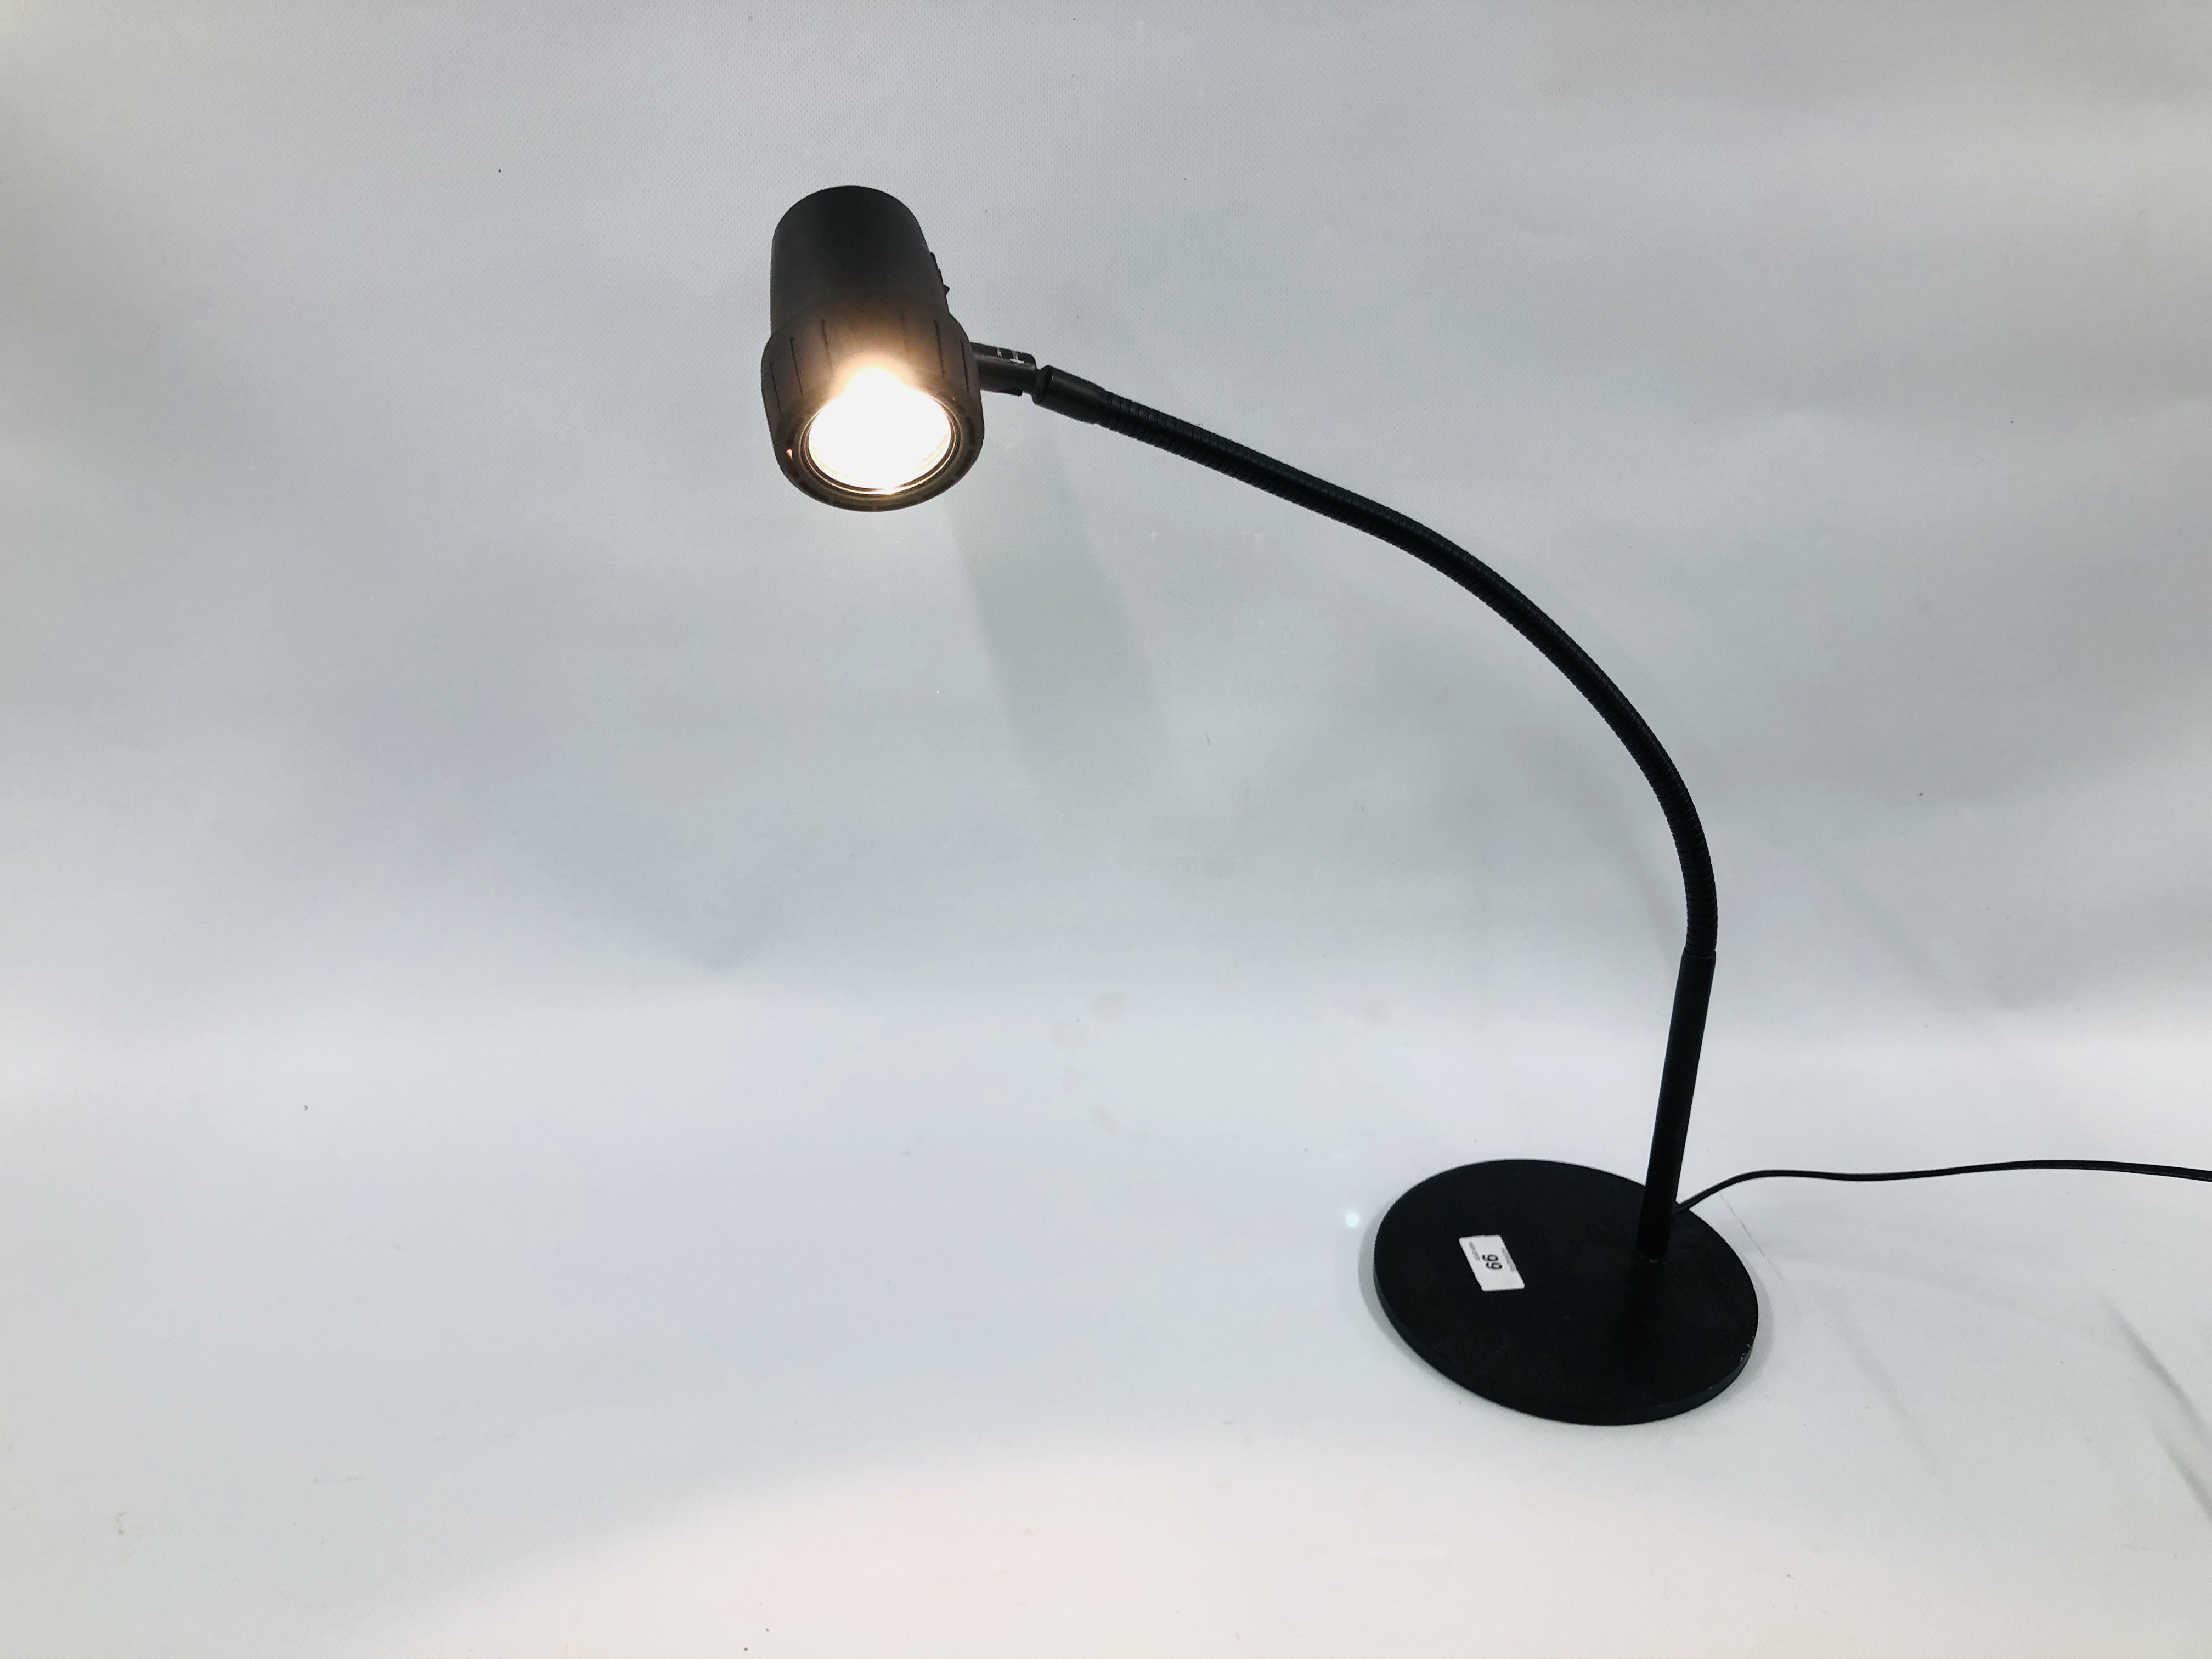 A "SERIOUS READERS" ANGLE POISE READING LAMP - SOLD AS SEEN. - Image 2 of 3